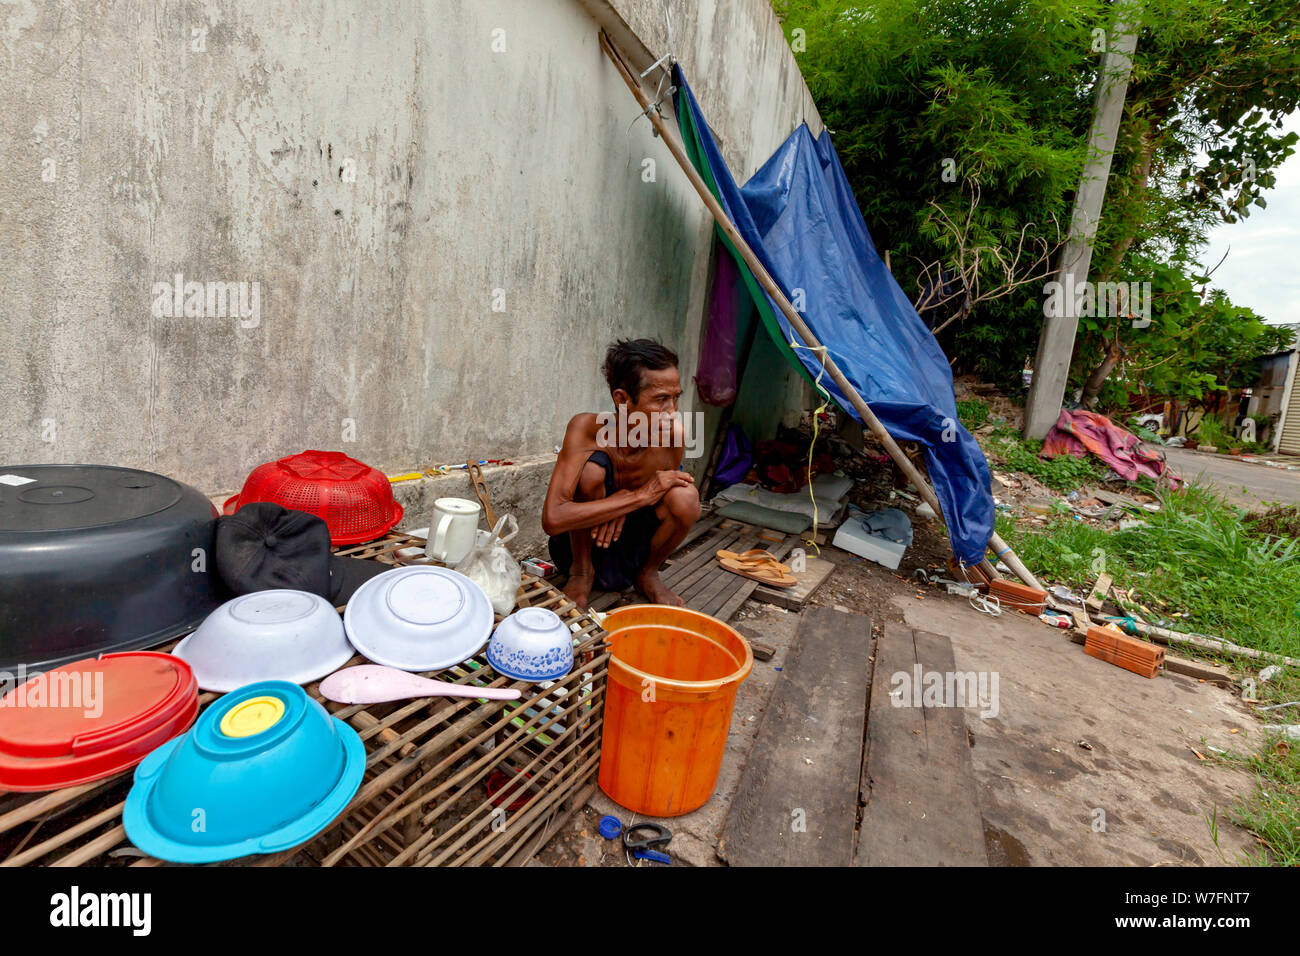 An elderly homeless Cambodian man sits near his ramshackle home on a city street in Kampong Cham, Cambodia. Stock Photo